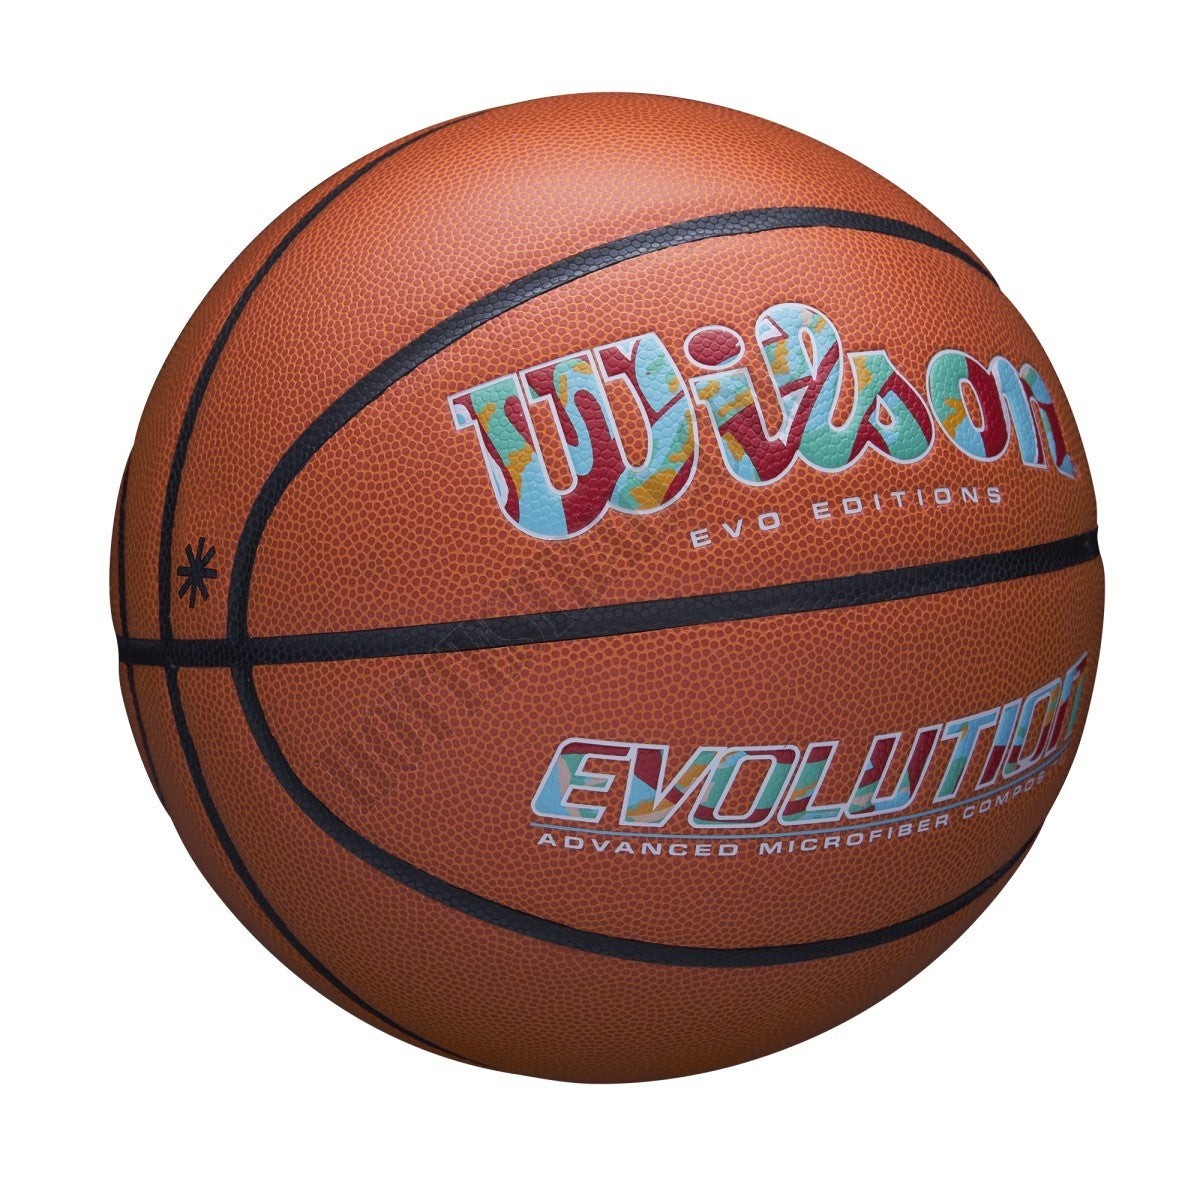 Evo Editions White Men Can’t Jump Basketball - Wilson Discount Store - -8